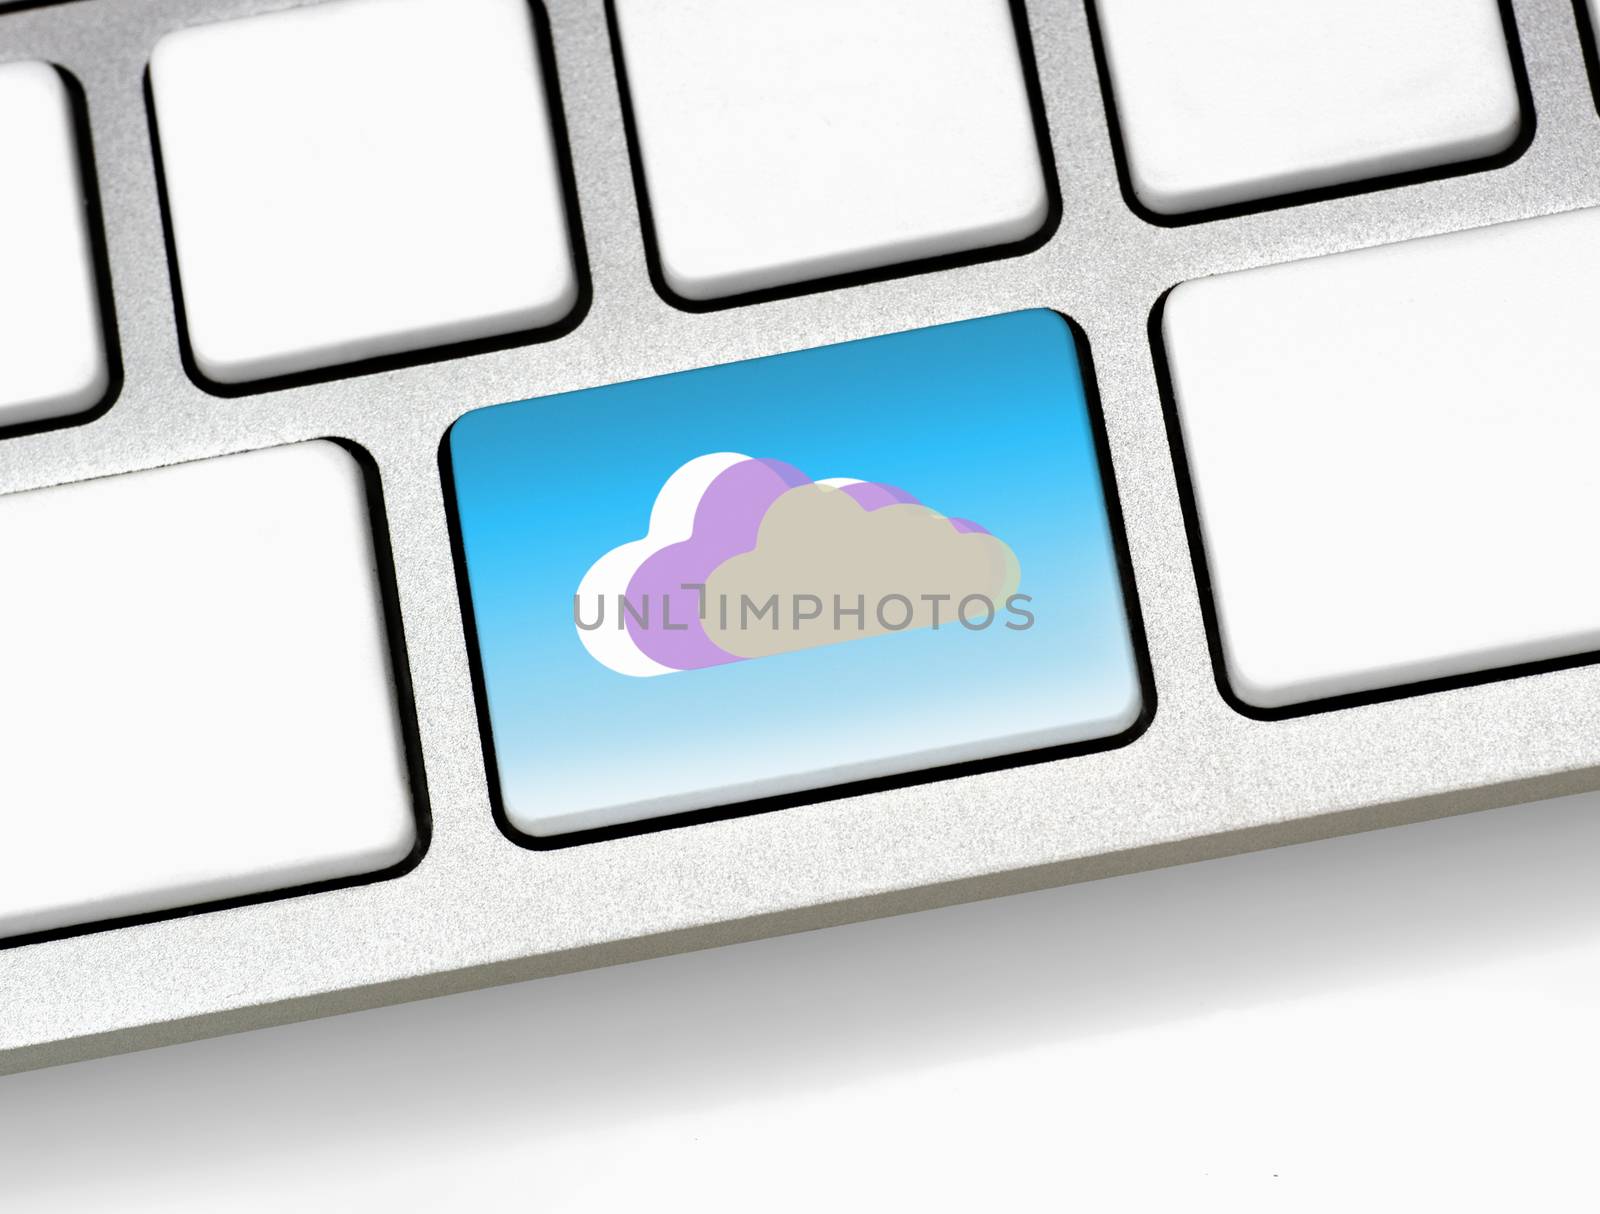 keyboard layout for cloud computing {super high resolution/shot with PhaseOne P45}